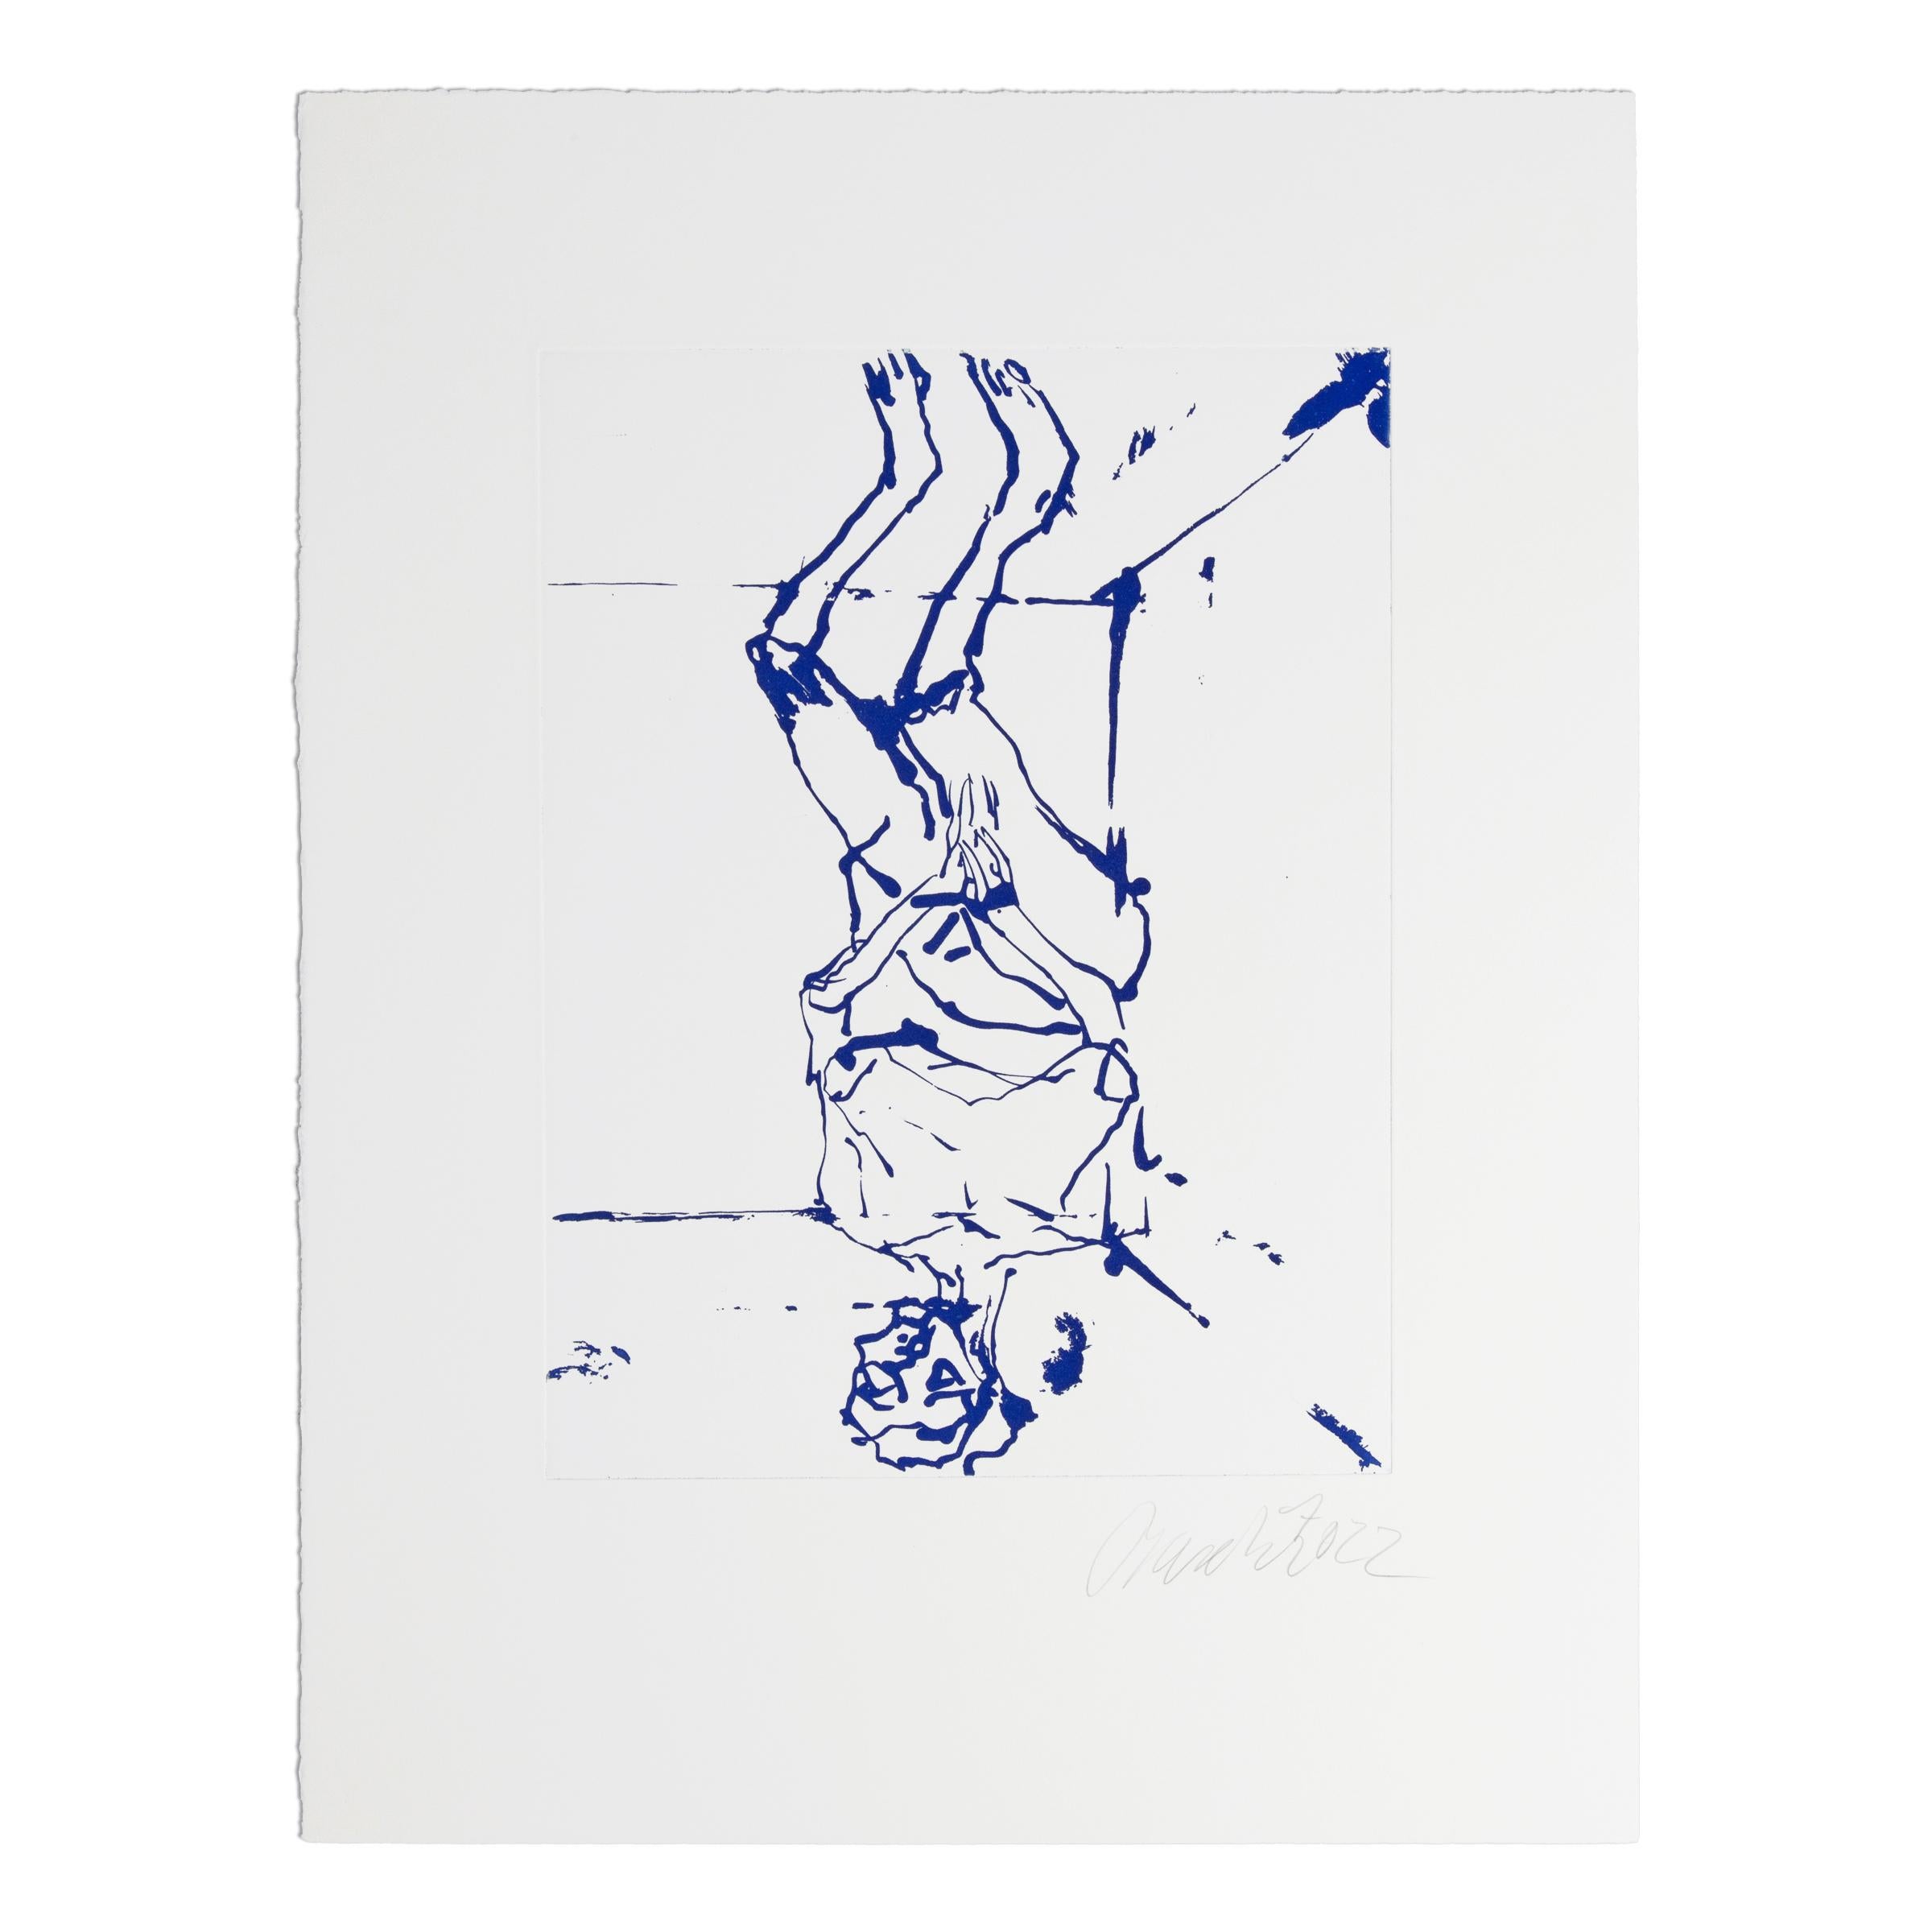 Georg Baselitz (German, b. 1938)
Serpentine (Blue), 2022
Medium: Etching with sugar lift aquatint on wove paper
Dimensions: 53 × 39 cm (20 9/10 × 15 2/5 in)
Edition of 50: Hand-signed and numbered
Publisher: Serpentine Gallery, London
Condition: Mint